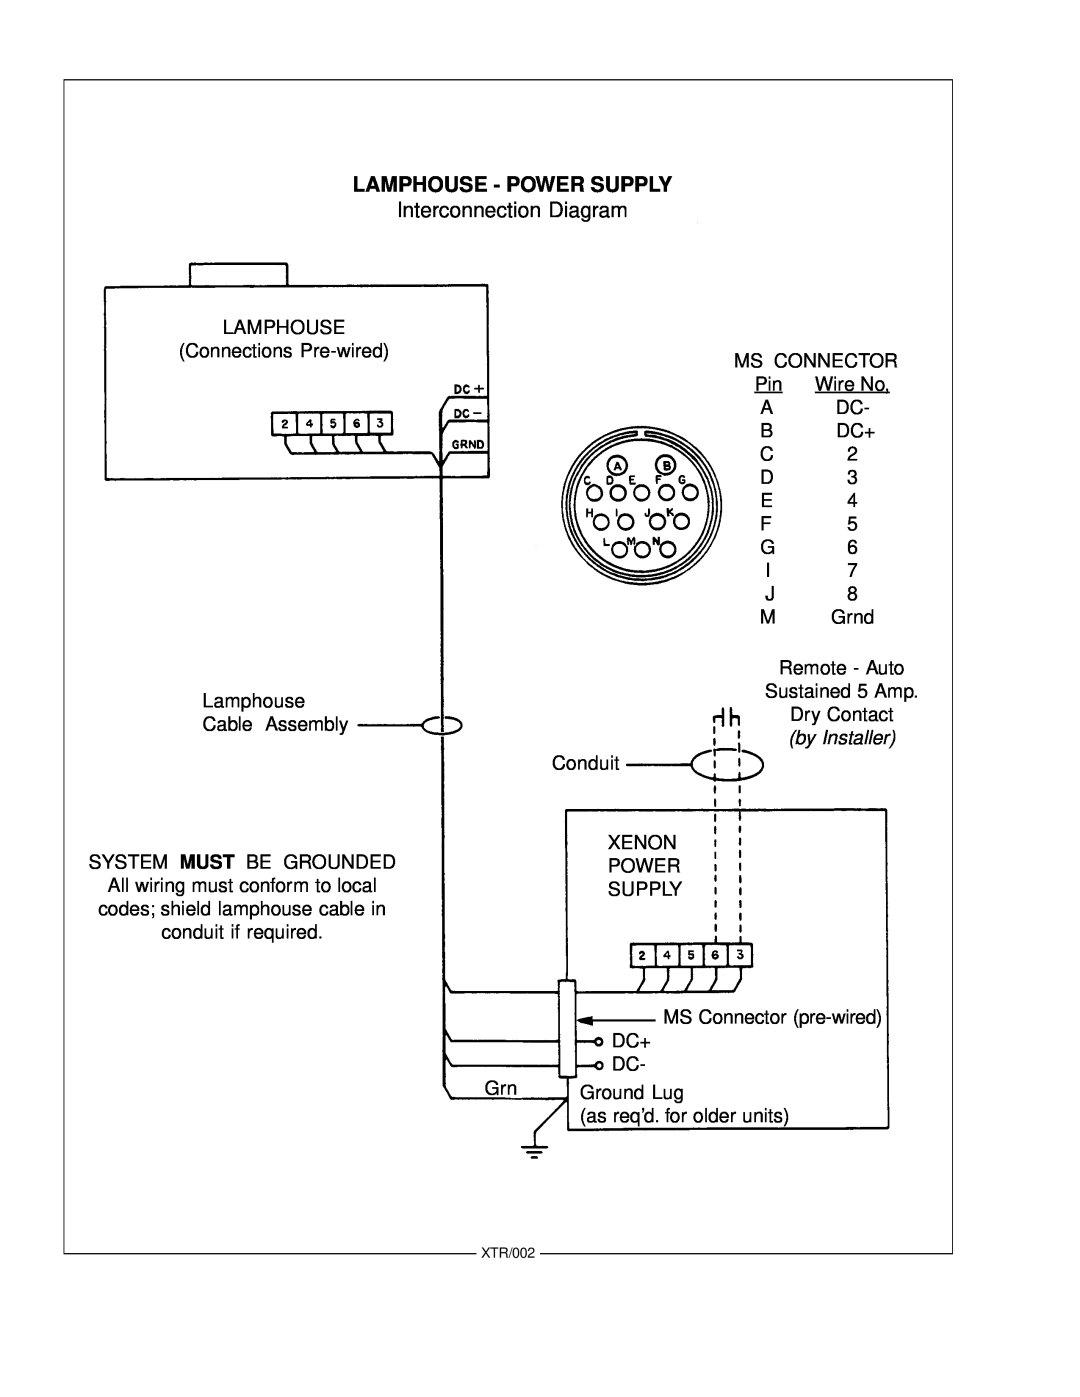 Strong Enterprises 48057 manual Interconnection Diagram, Lamphouse - Power Supply, by Installer 